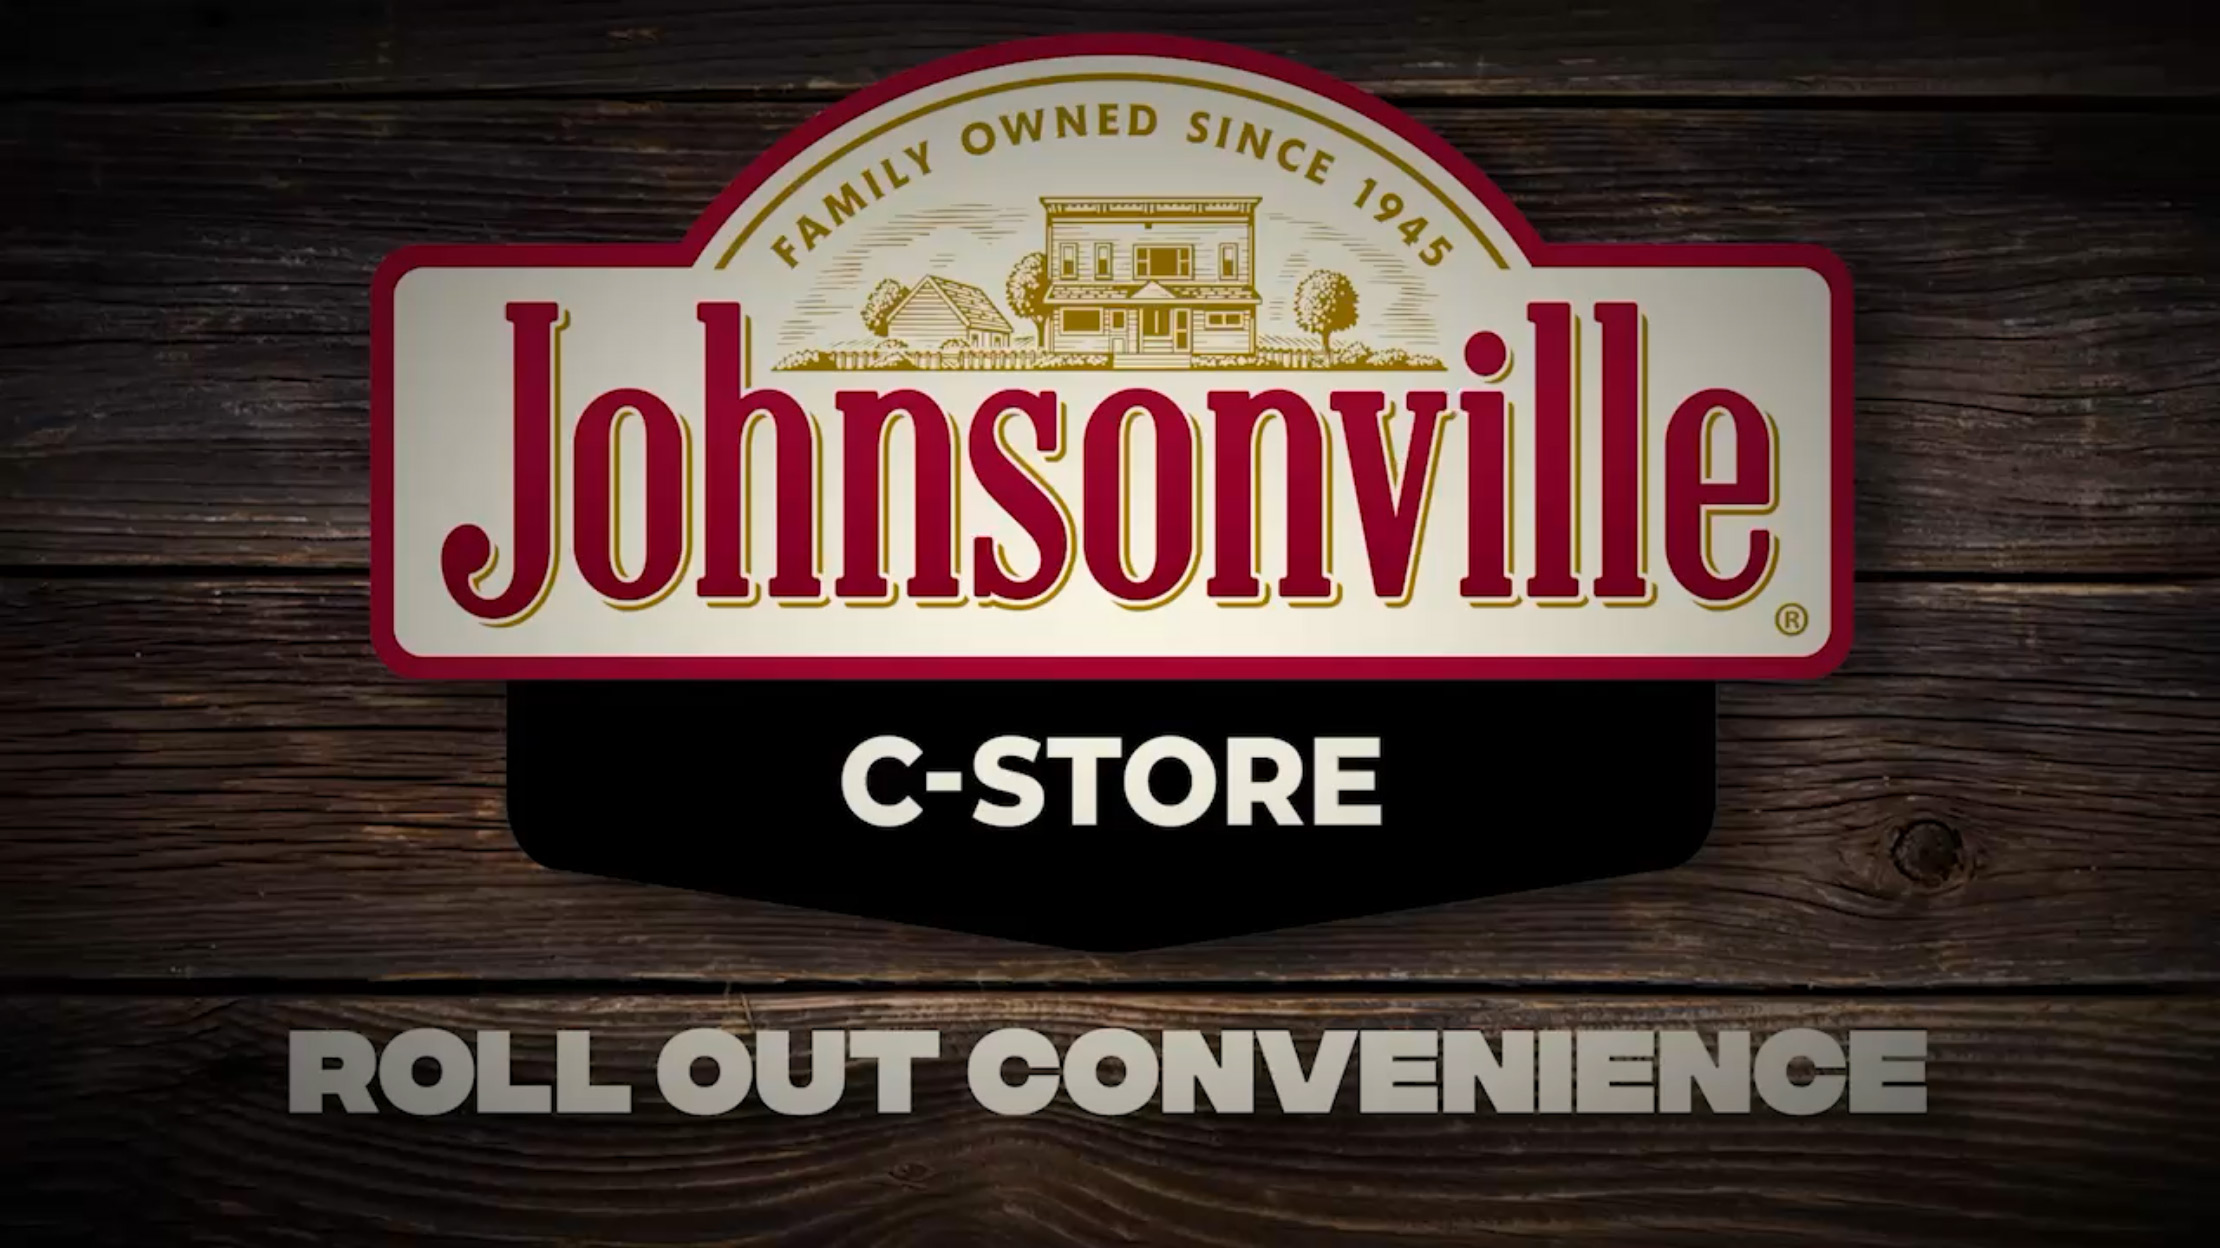 Creative Energy - Johnsonville  Trade Show Graphics & Roller Grill Video